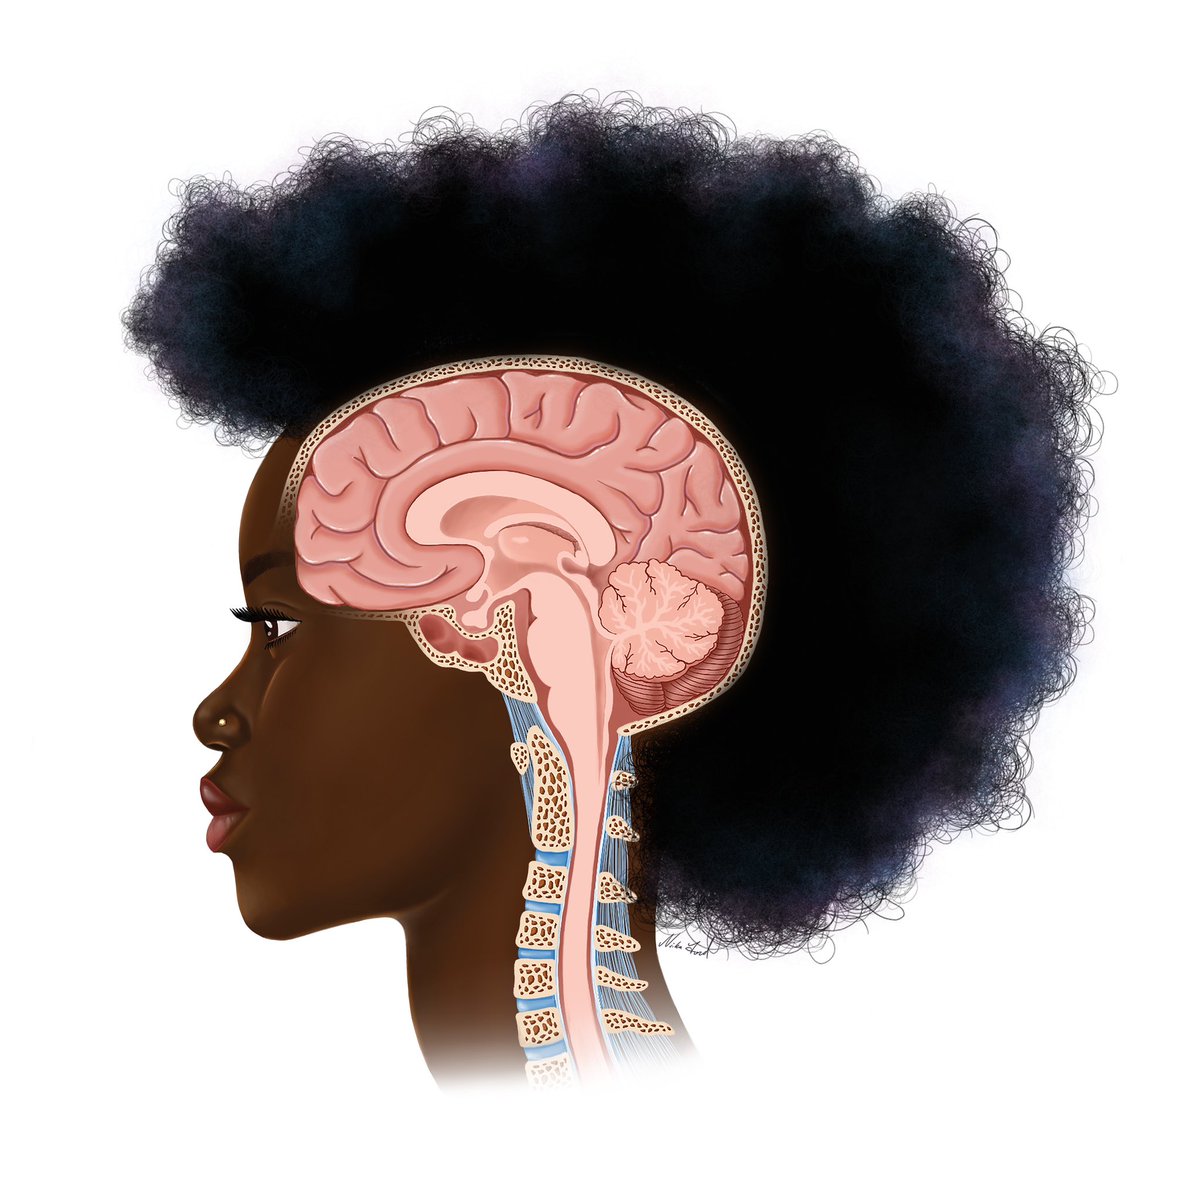 Happy #BrainAwarenessWeek! Black is beautiful and more representation is needed in medical art. 

#RepresentationMatters #neurotwitter #medicalillustration See more of my work at: enlightvisuals.com